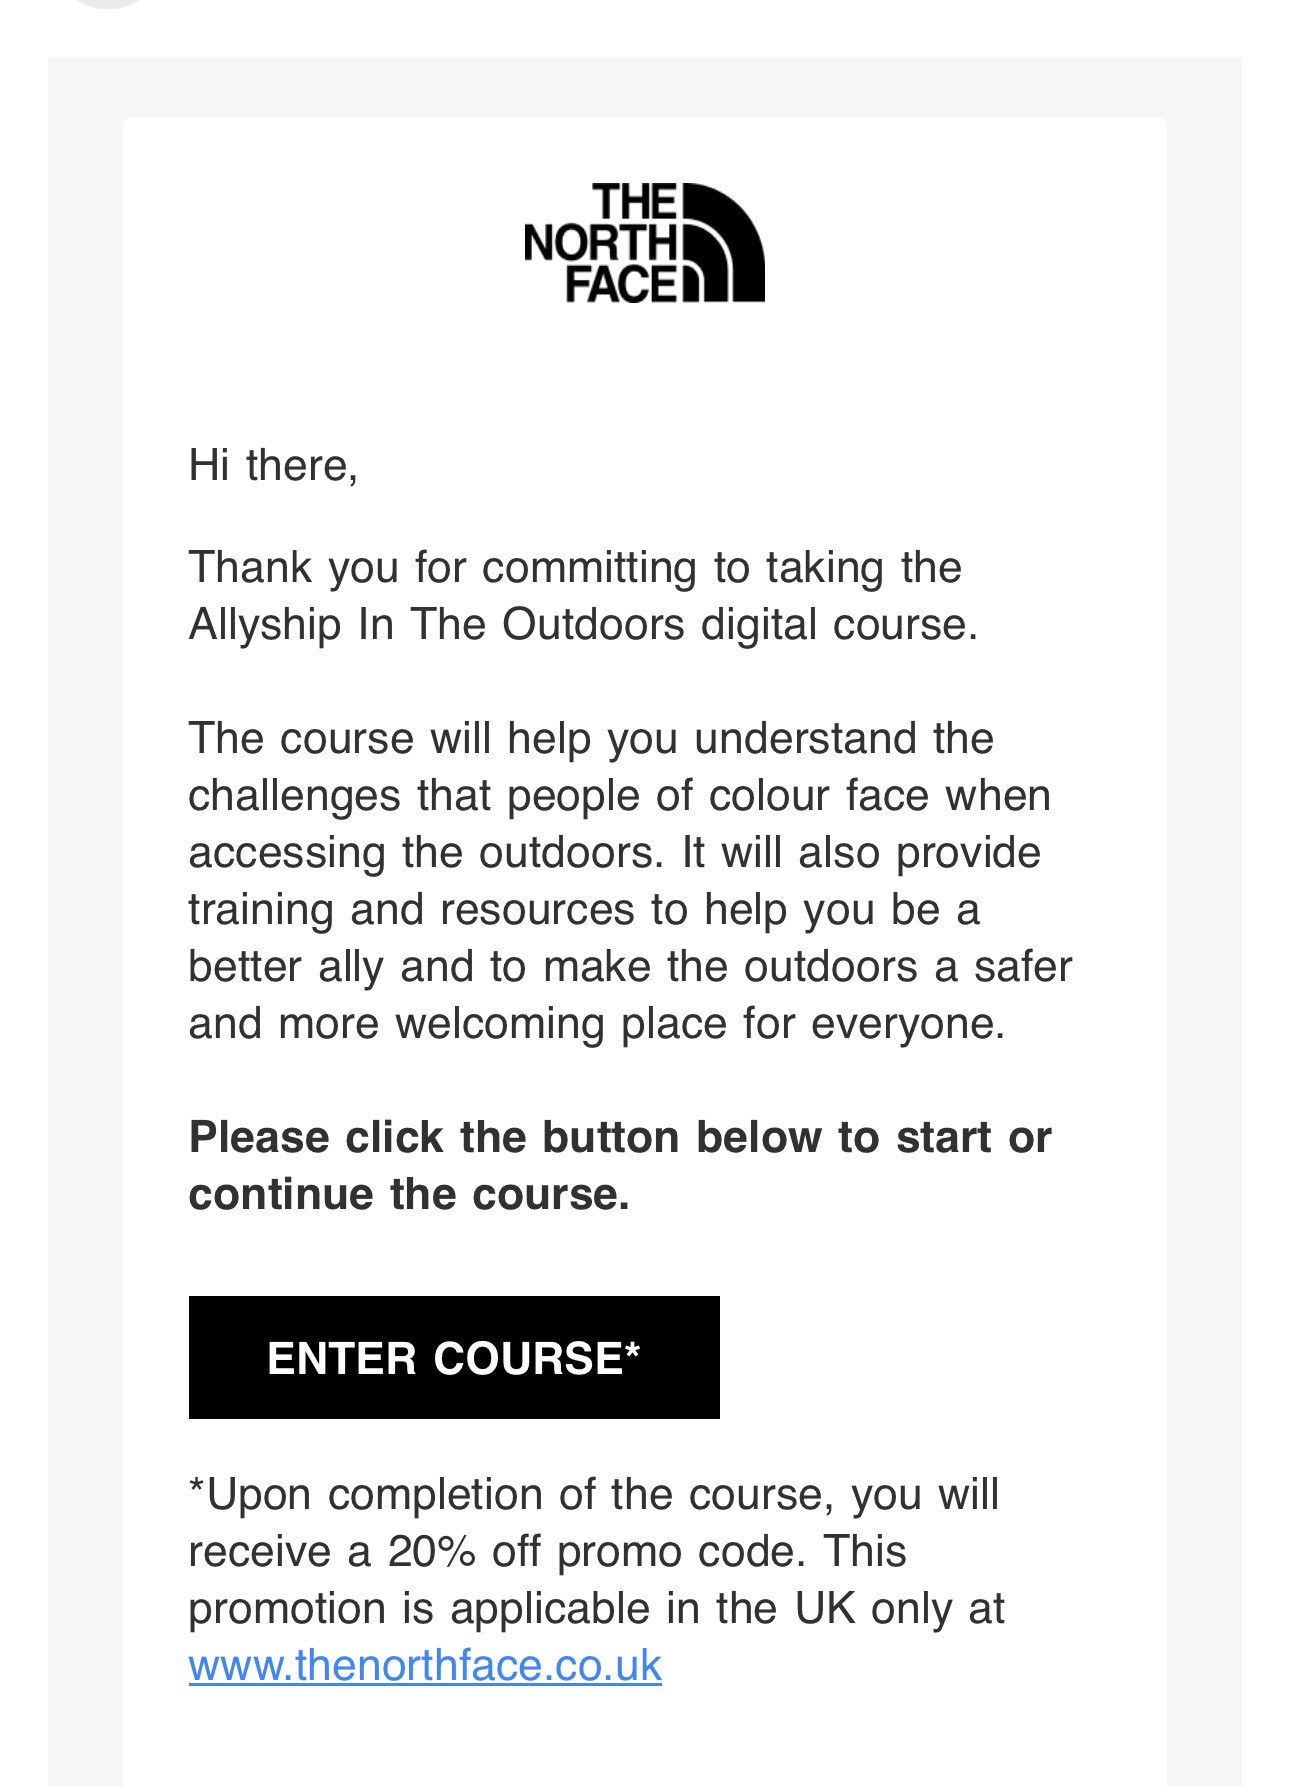 The North Face Is Offering UK Customers A Discount For Taking A 'Race Course' - And Not Everyone Is Happy About It